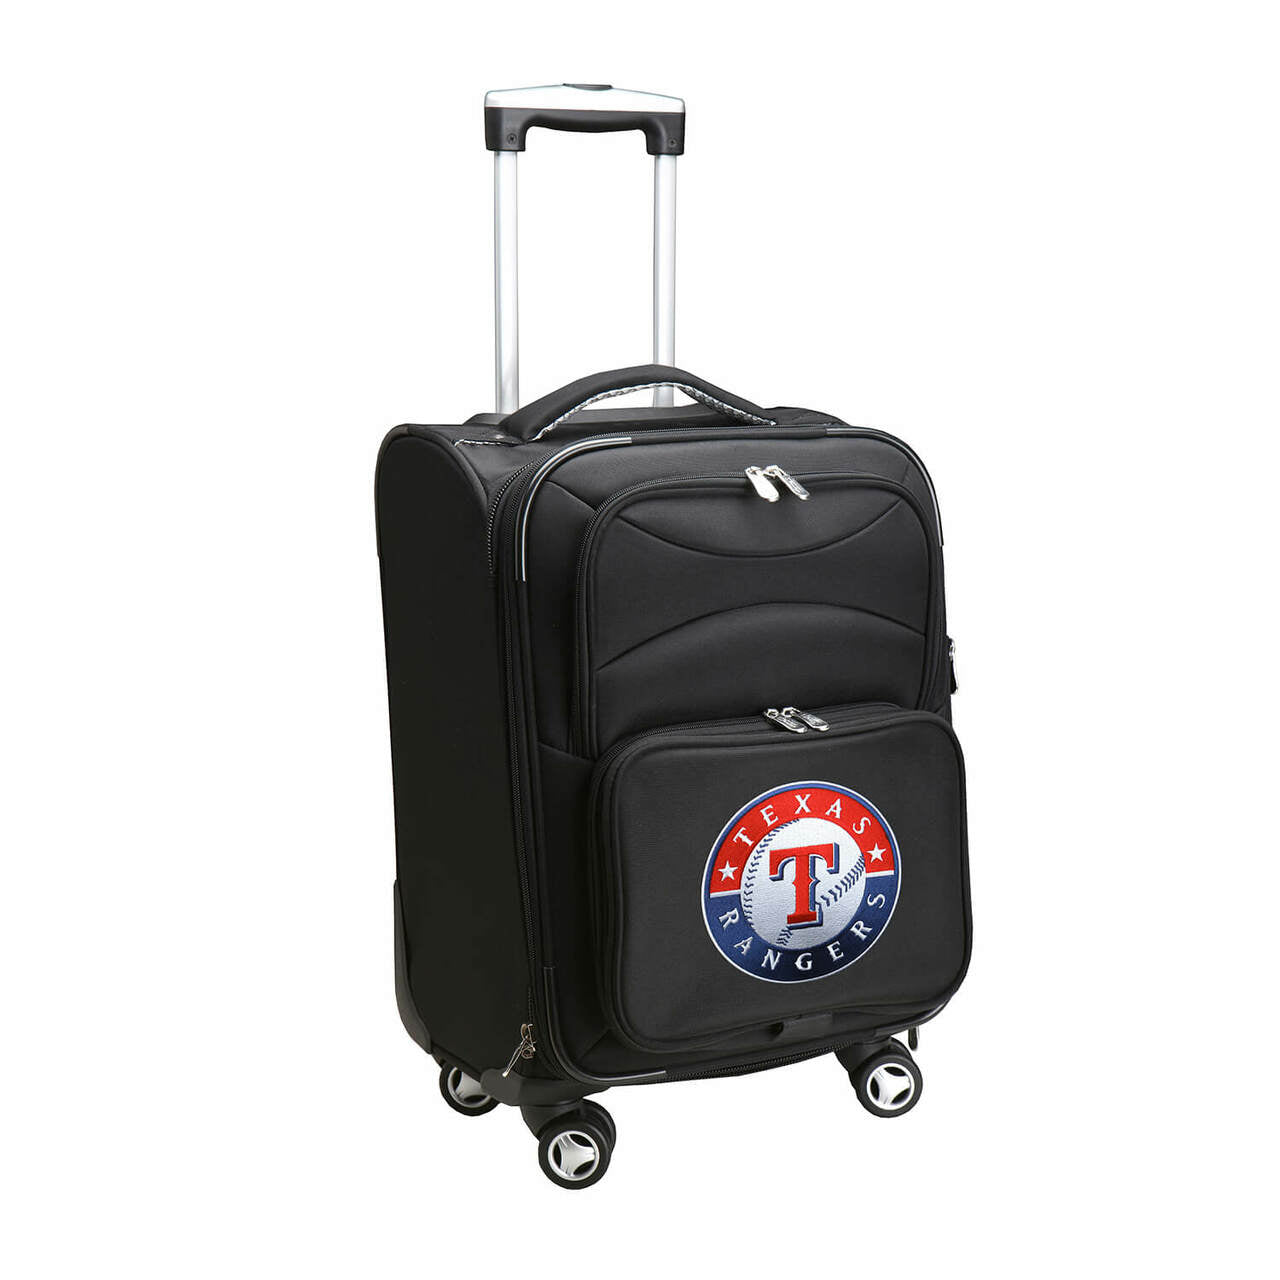 Rangers Luggage | Texas Rangers 20" Carry-on Spinner Luggage